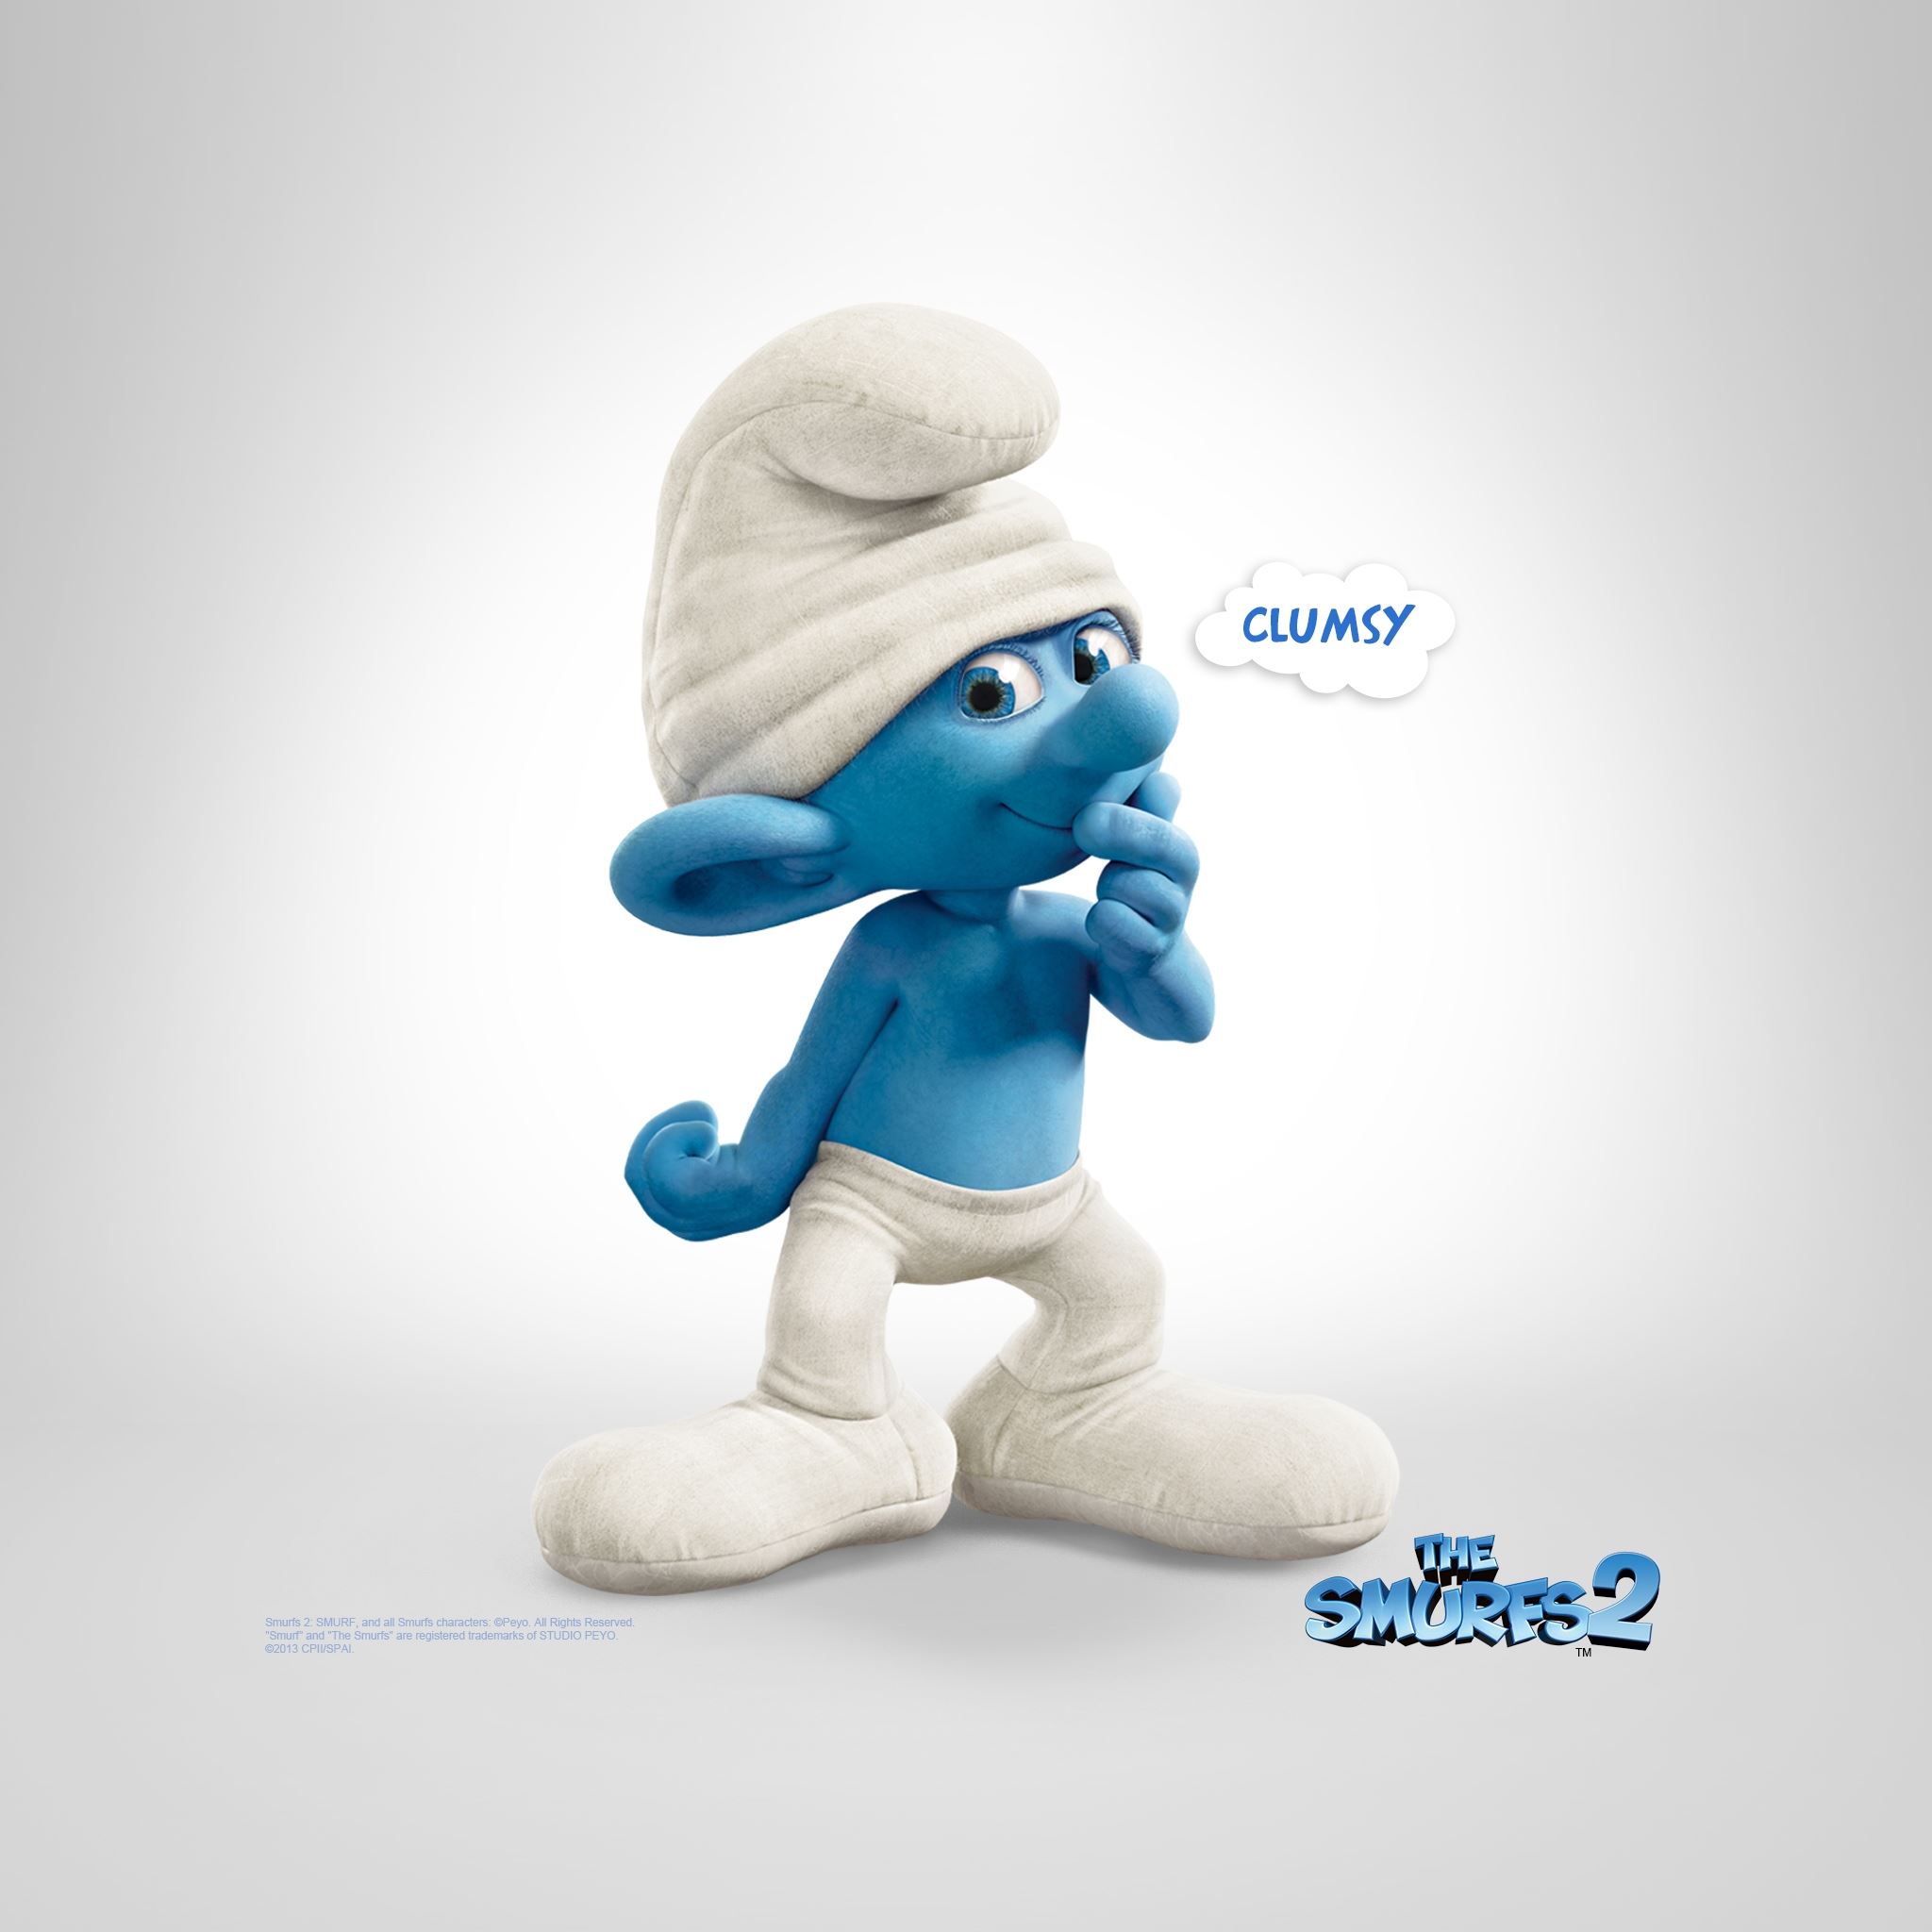 Clumsy The Smurfs 2 iPad Air wallpaper 